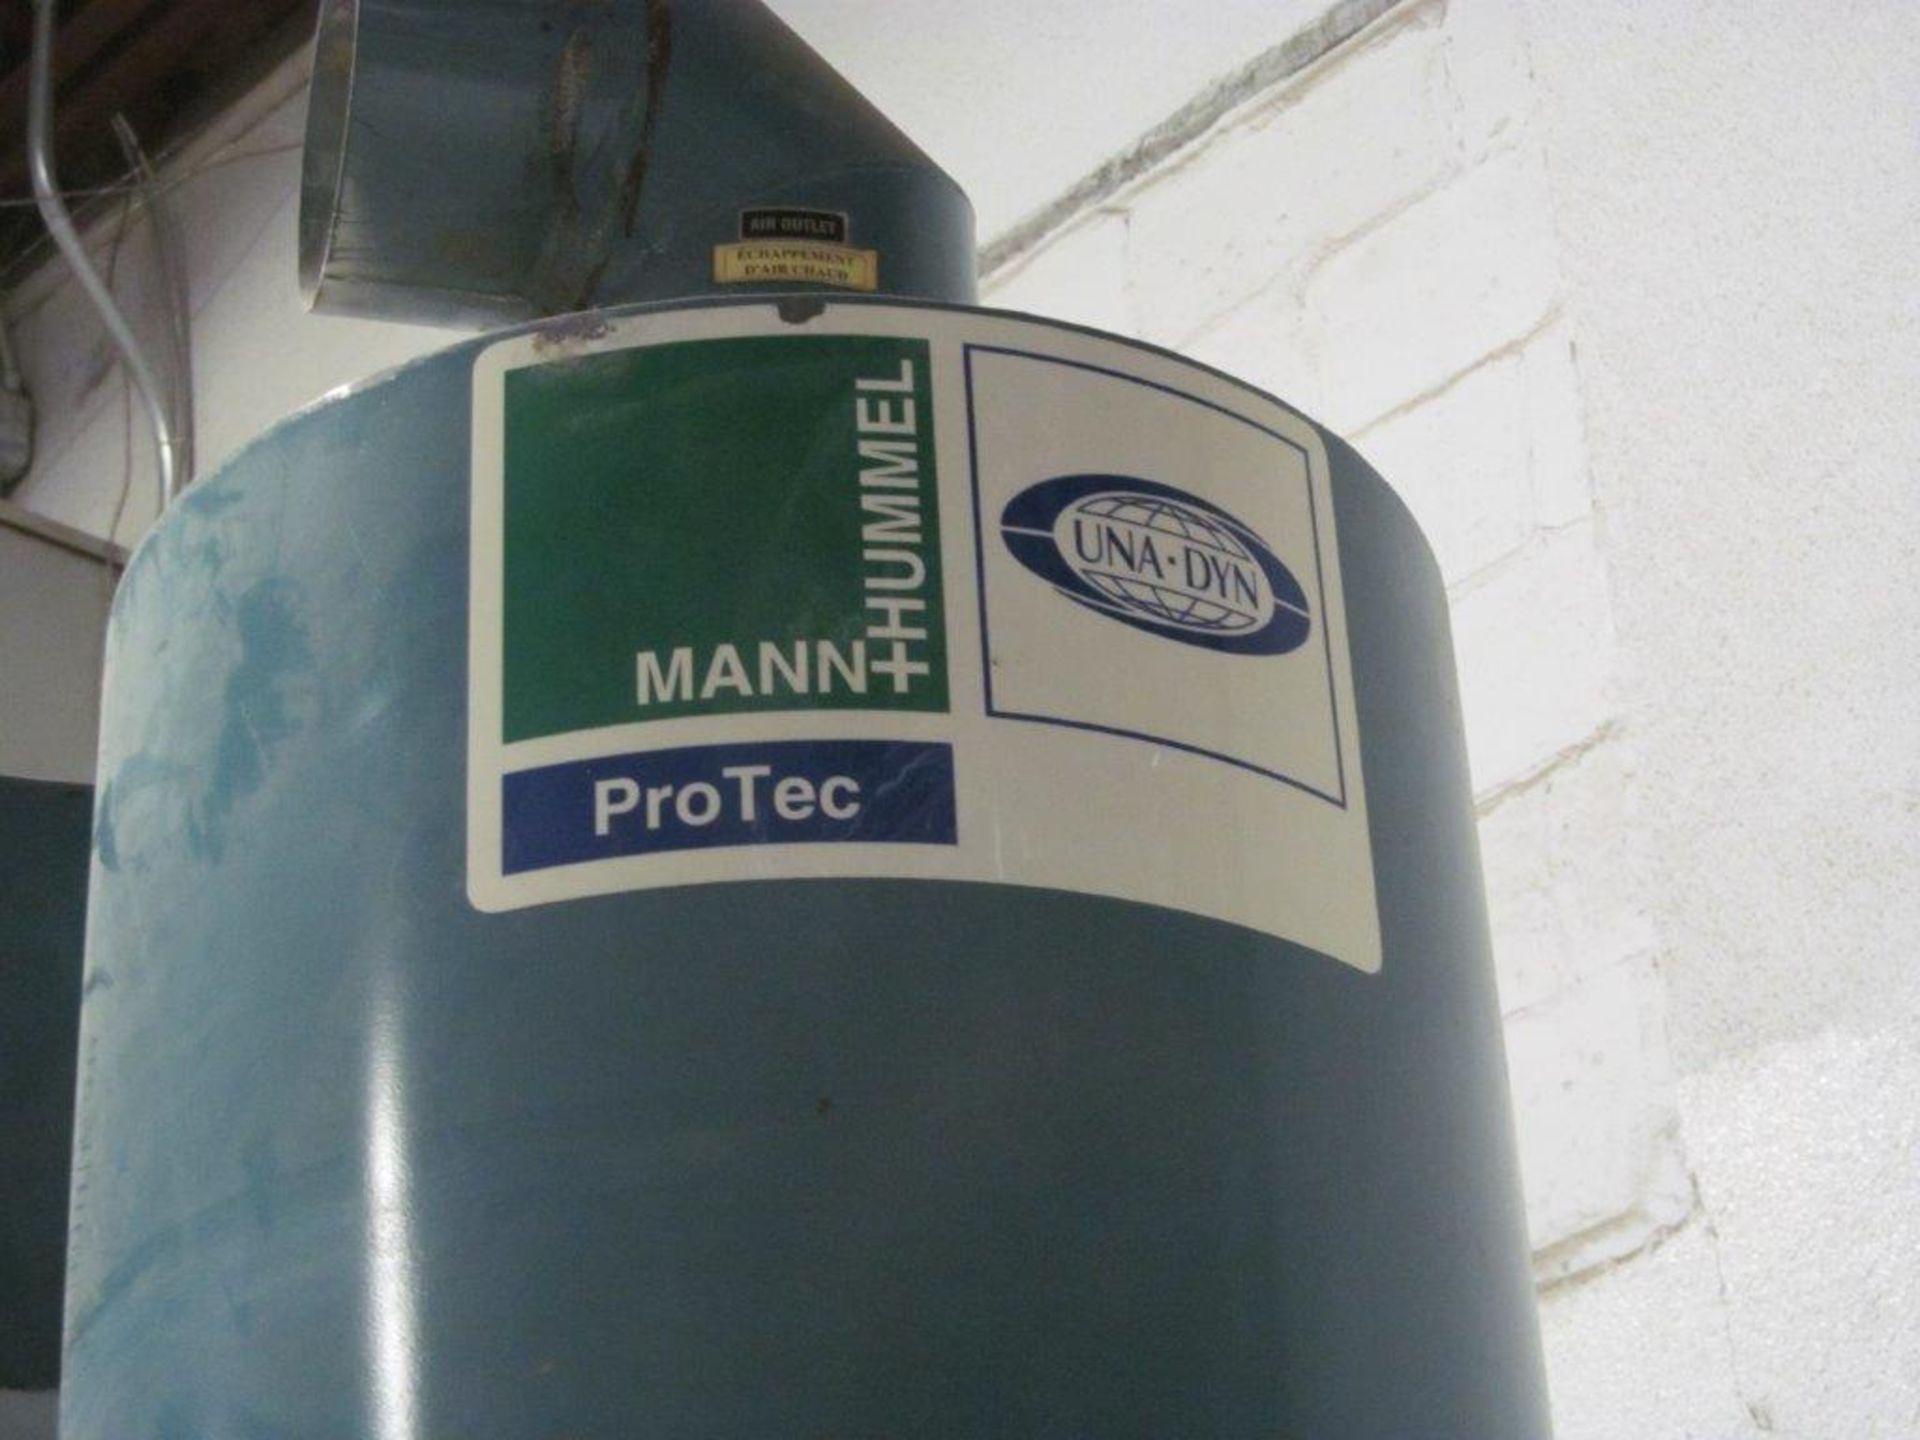 MANN HUMMEL PRO TEC UNA-DYN DUST COLLECTOR, SHELL ONLY - Image 2 of 2